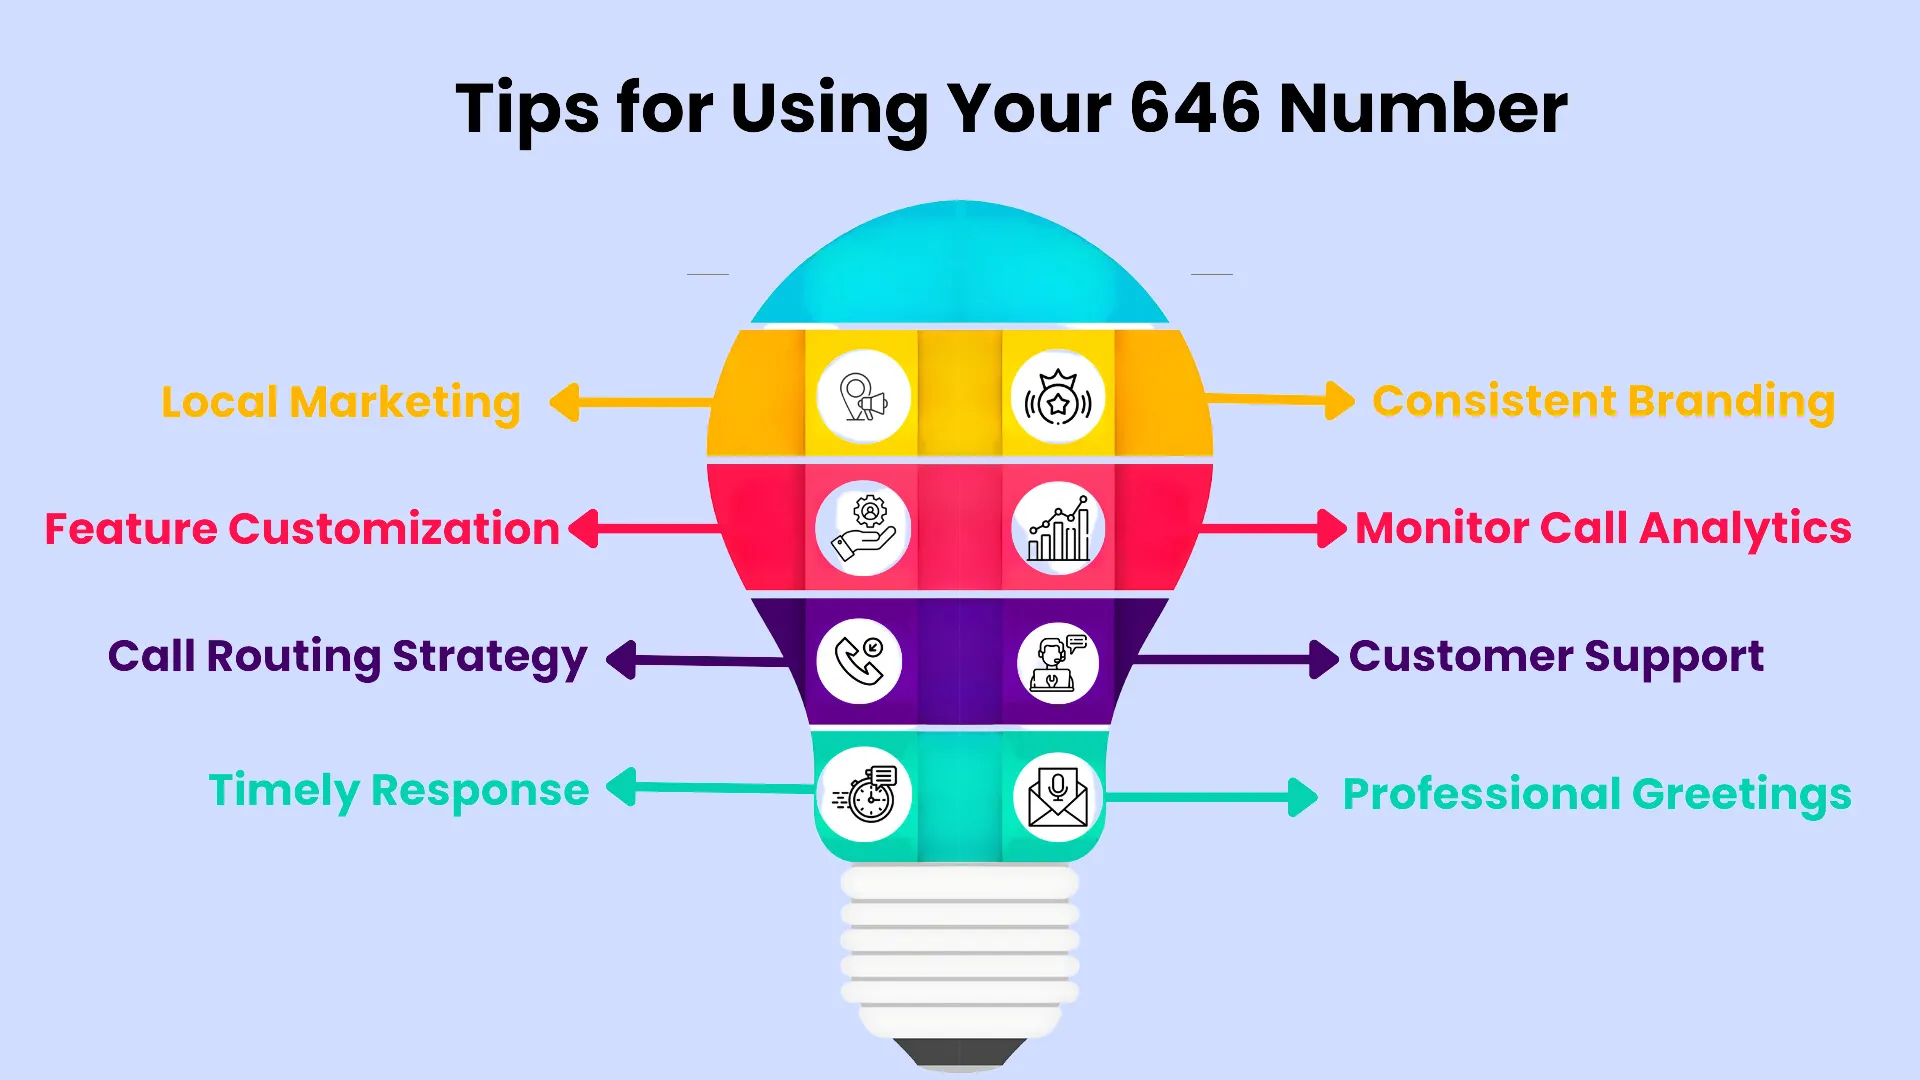 Tips for Using Your 646 Number